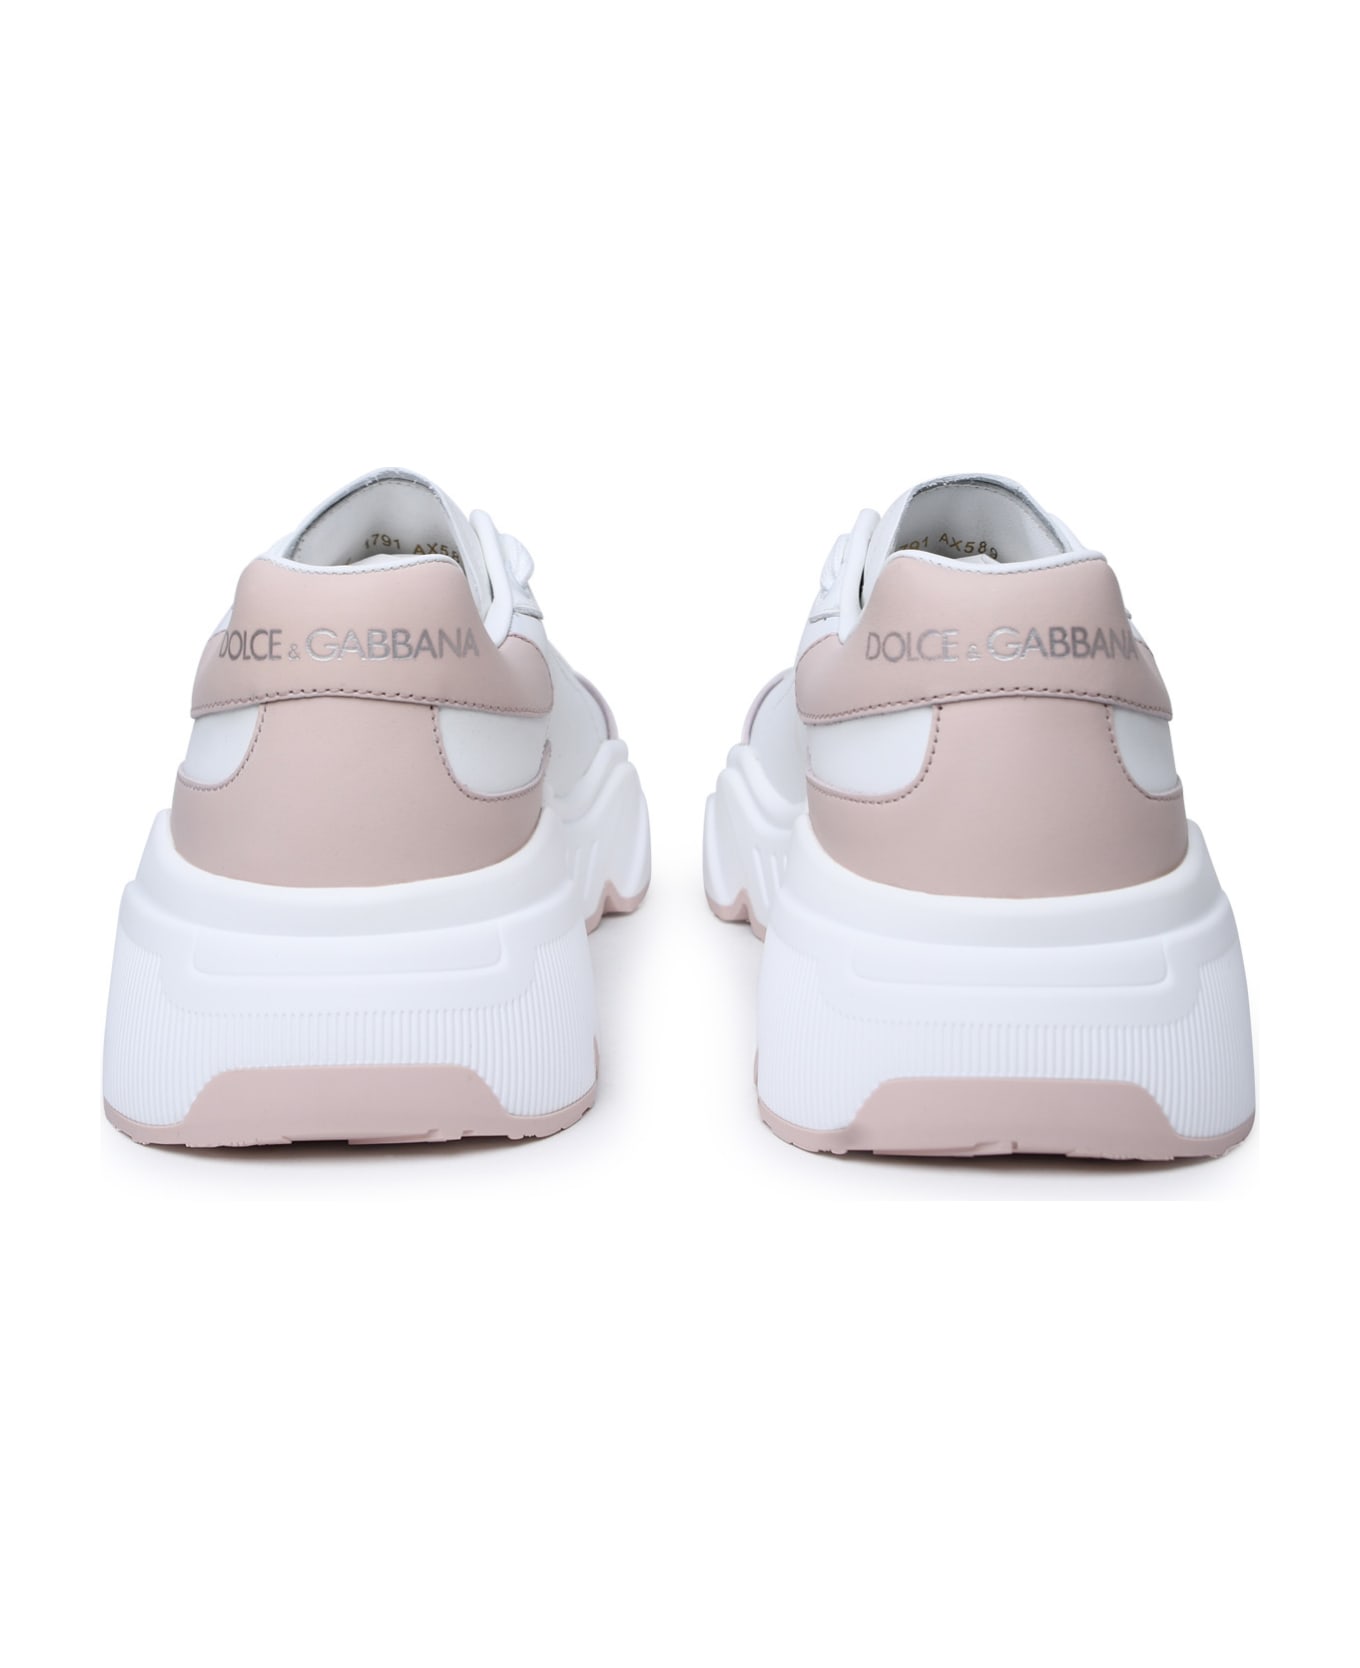 Dolce & Gabbana 'daymaster' White Leather Sneakers - Pink